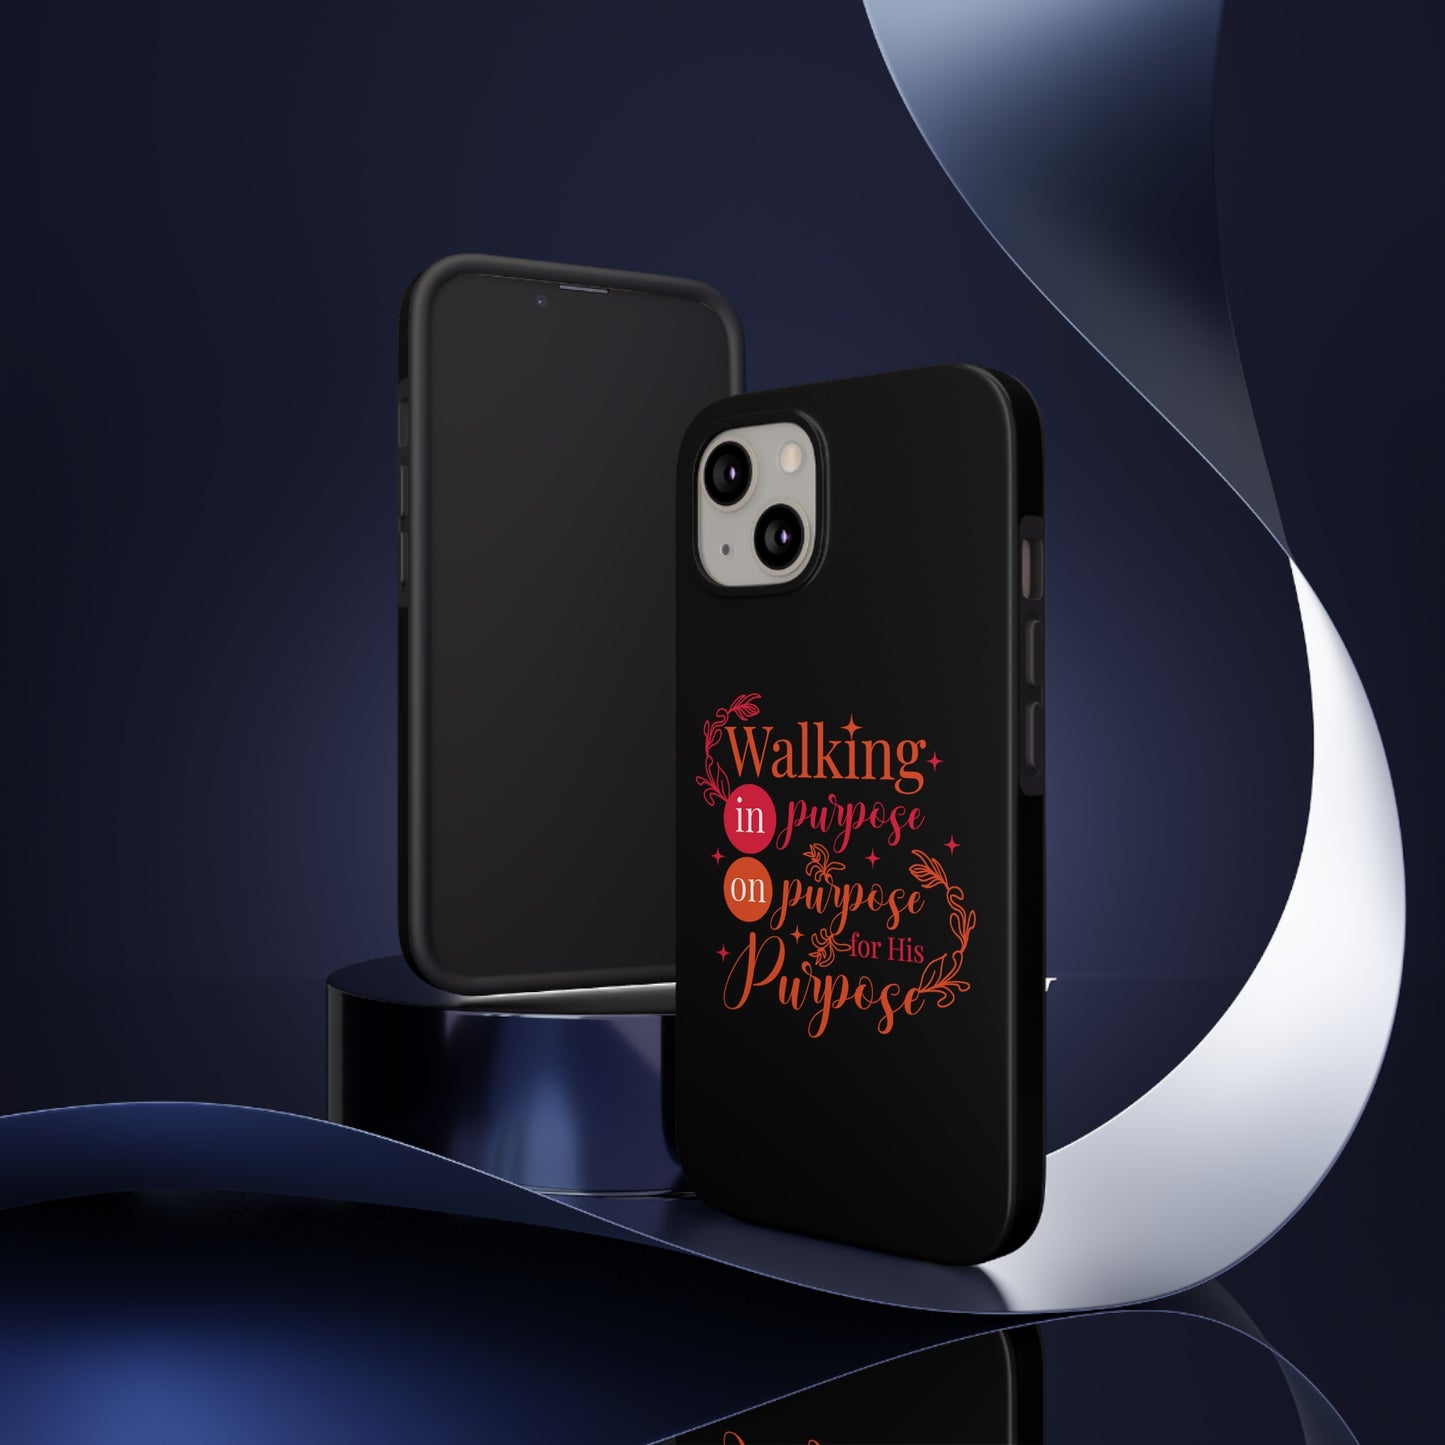 Walking On Purpose In Purpose For His Purpose Tough Phone Cases, Case-Mate